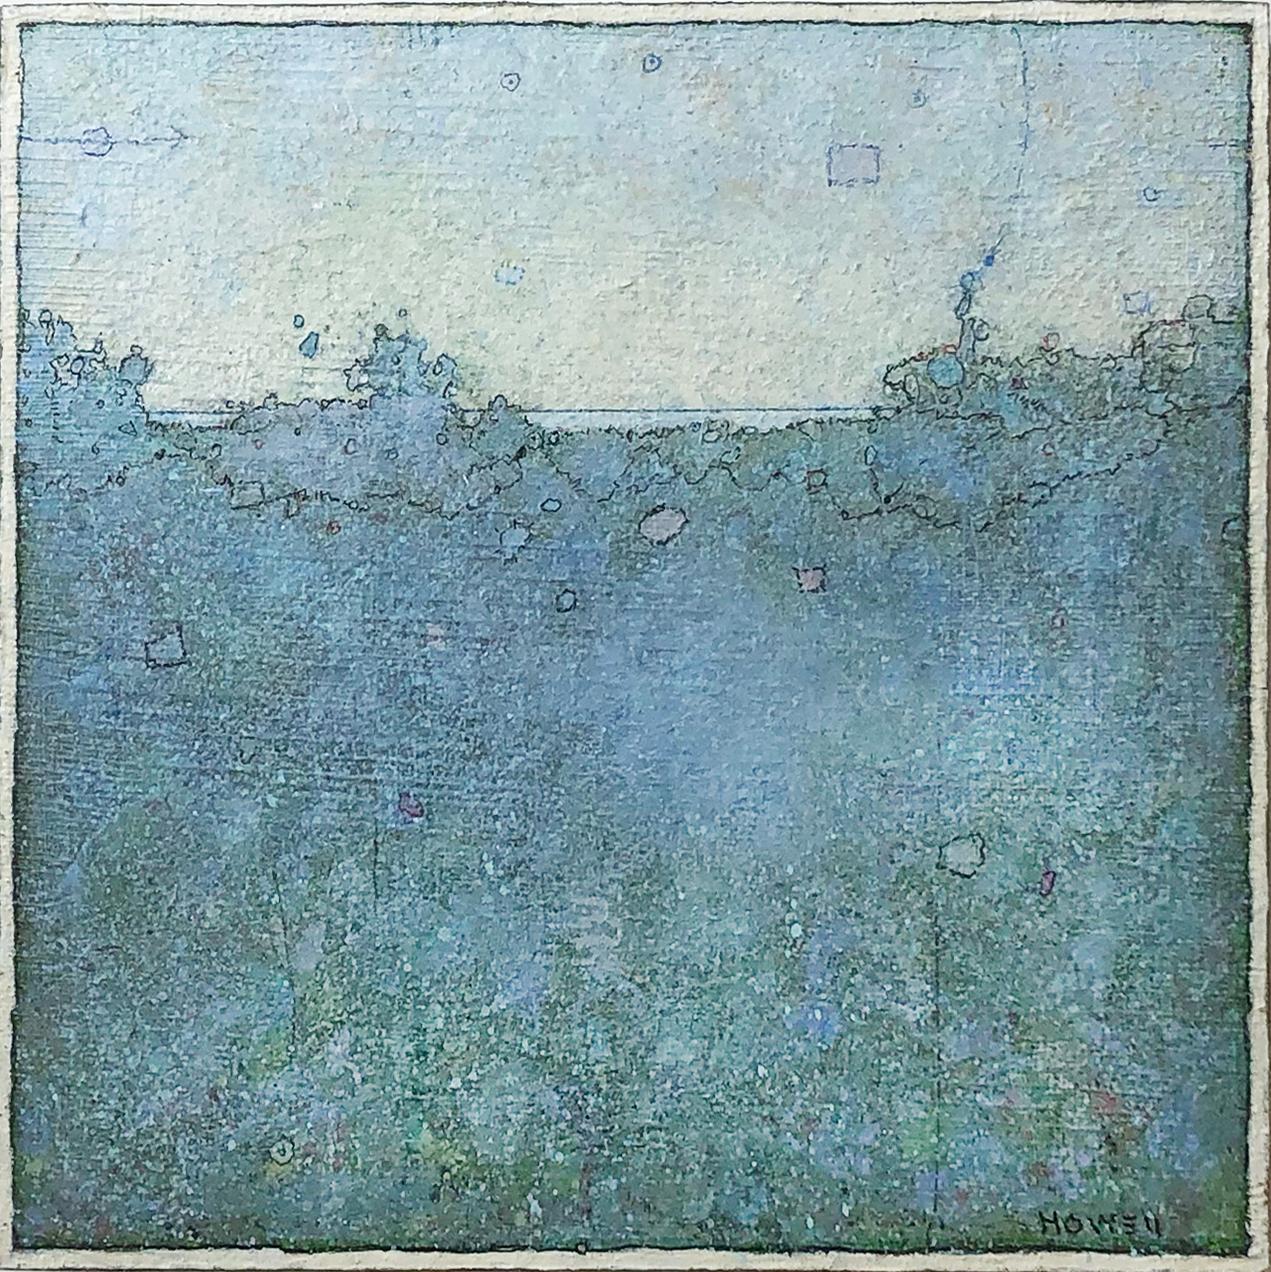 Elwood Howell Landscape Painting - 'Sky Patch' transitional acrylic dusty blue landscape/seascape small painting